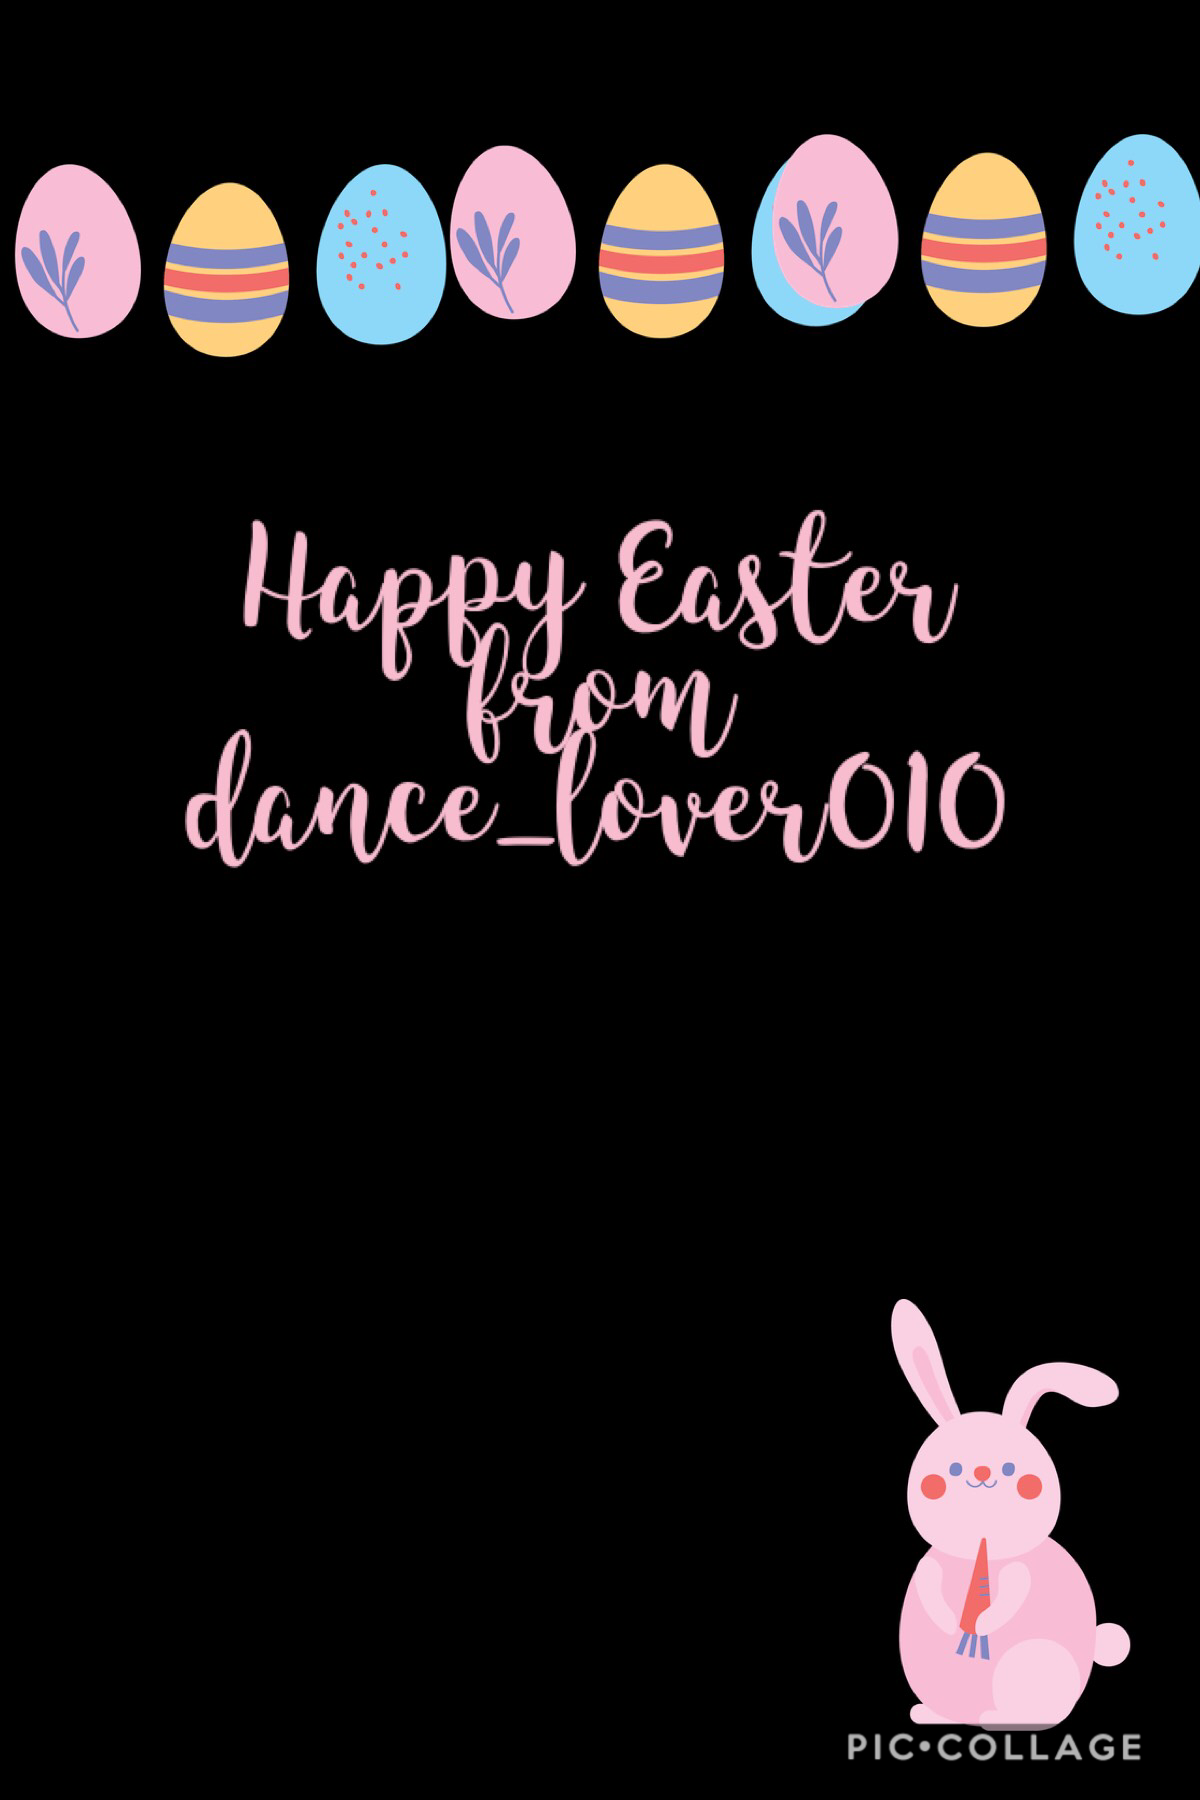 Happy Easter 🐰🐇 from dance_lover010